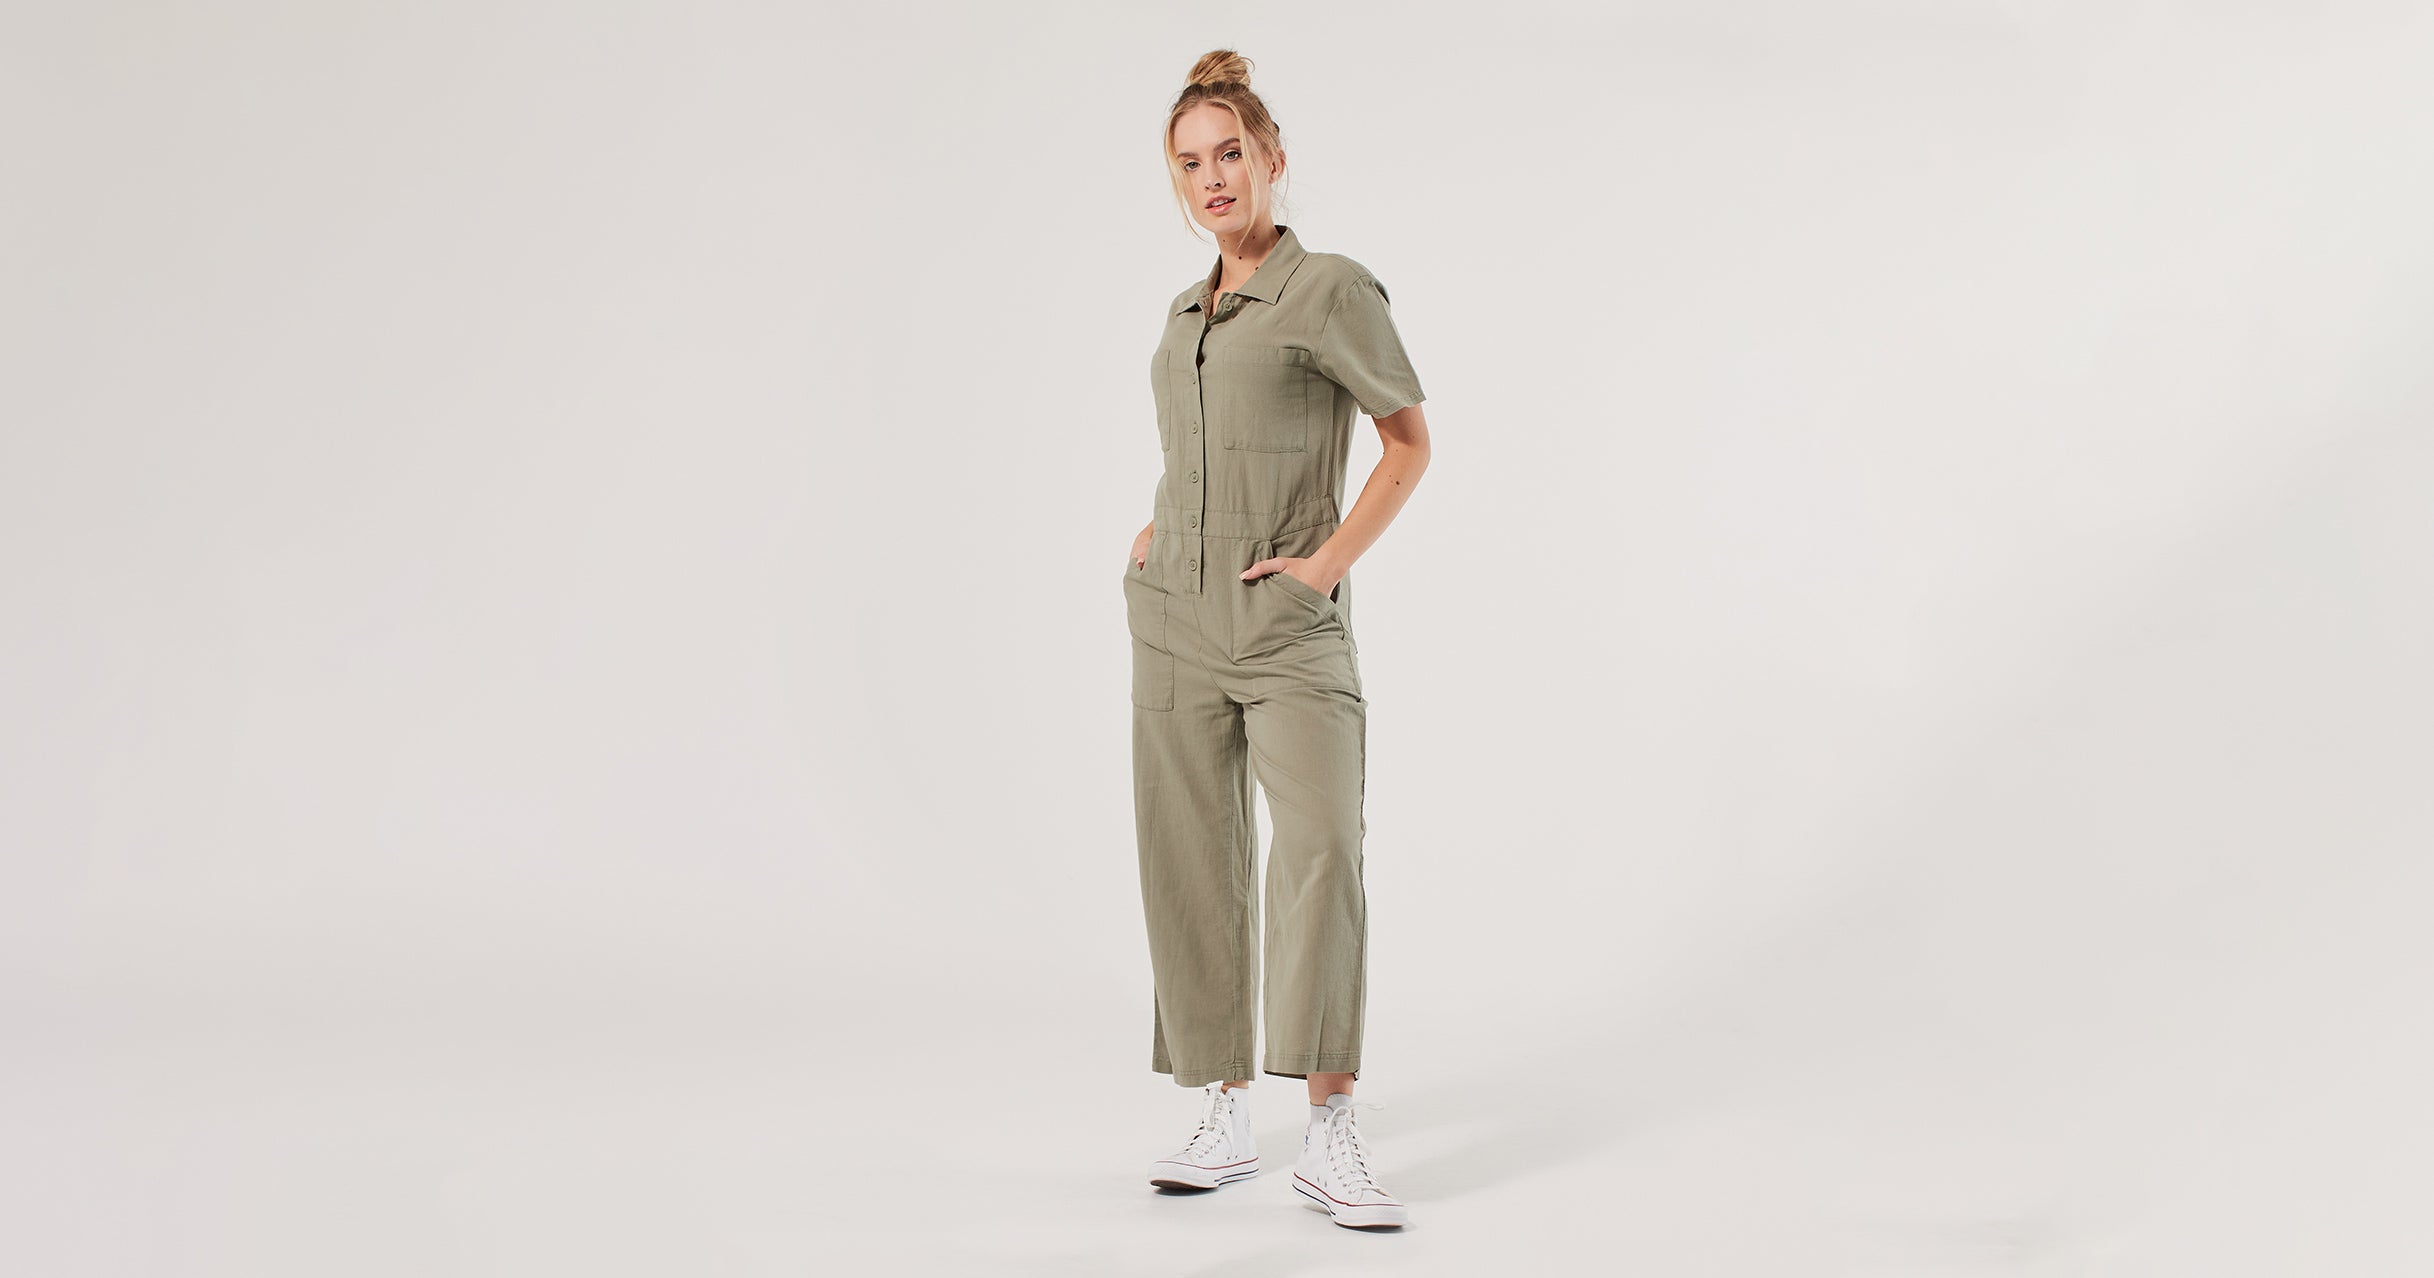 12 Best Jumpsuits For Women - Coveralls, Rompers